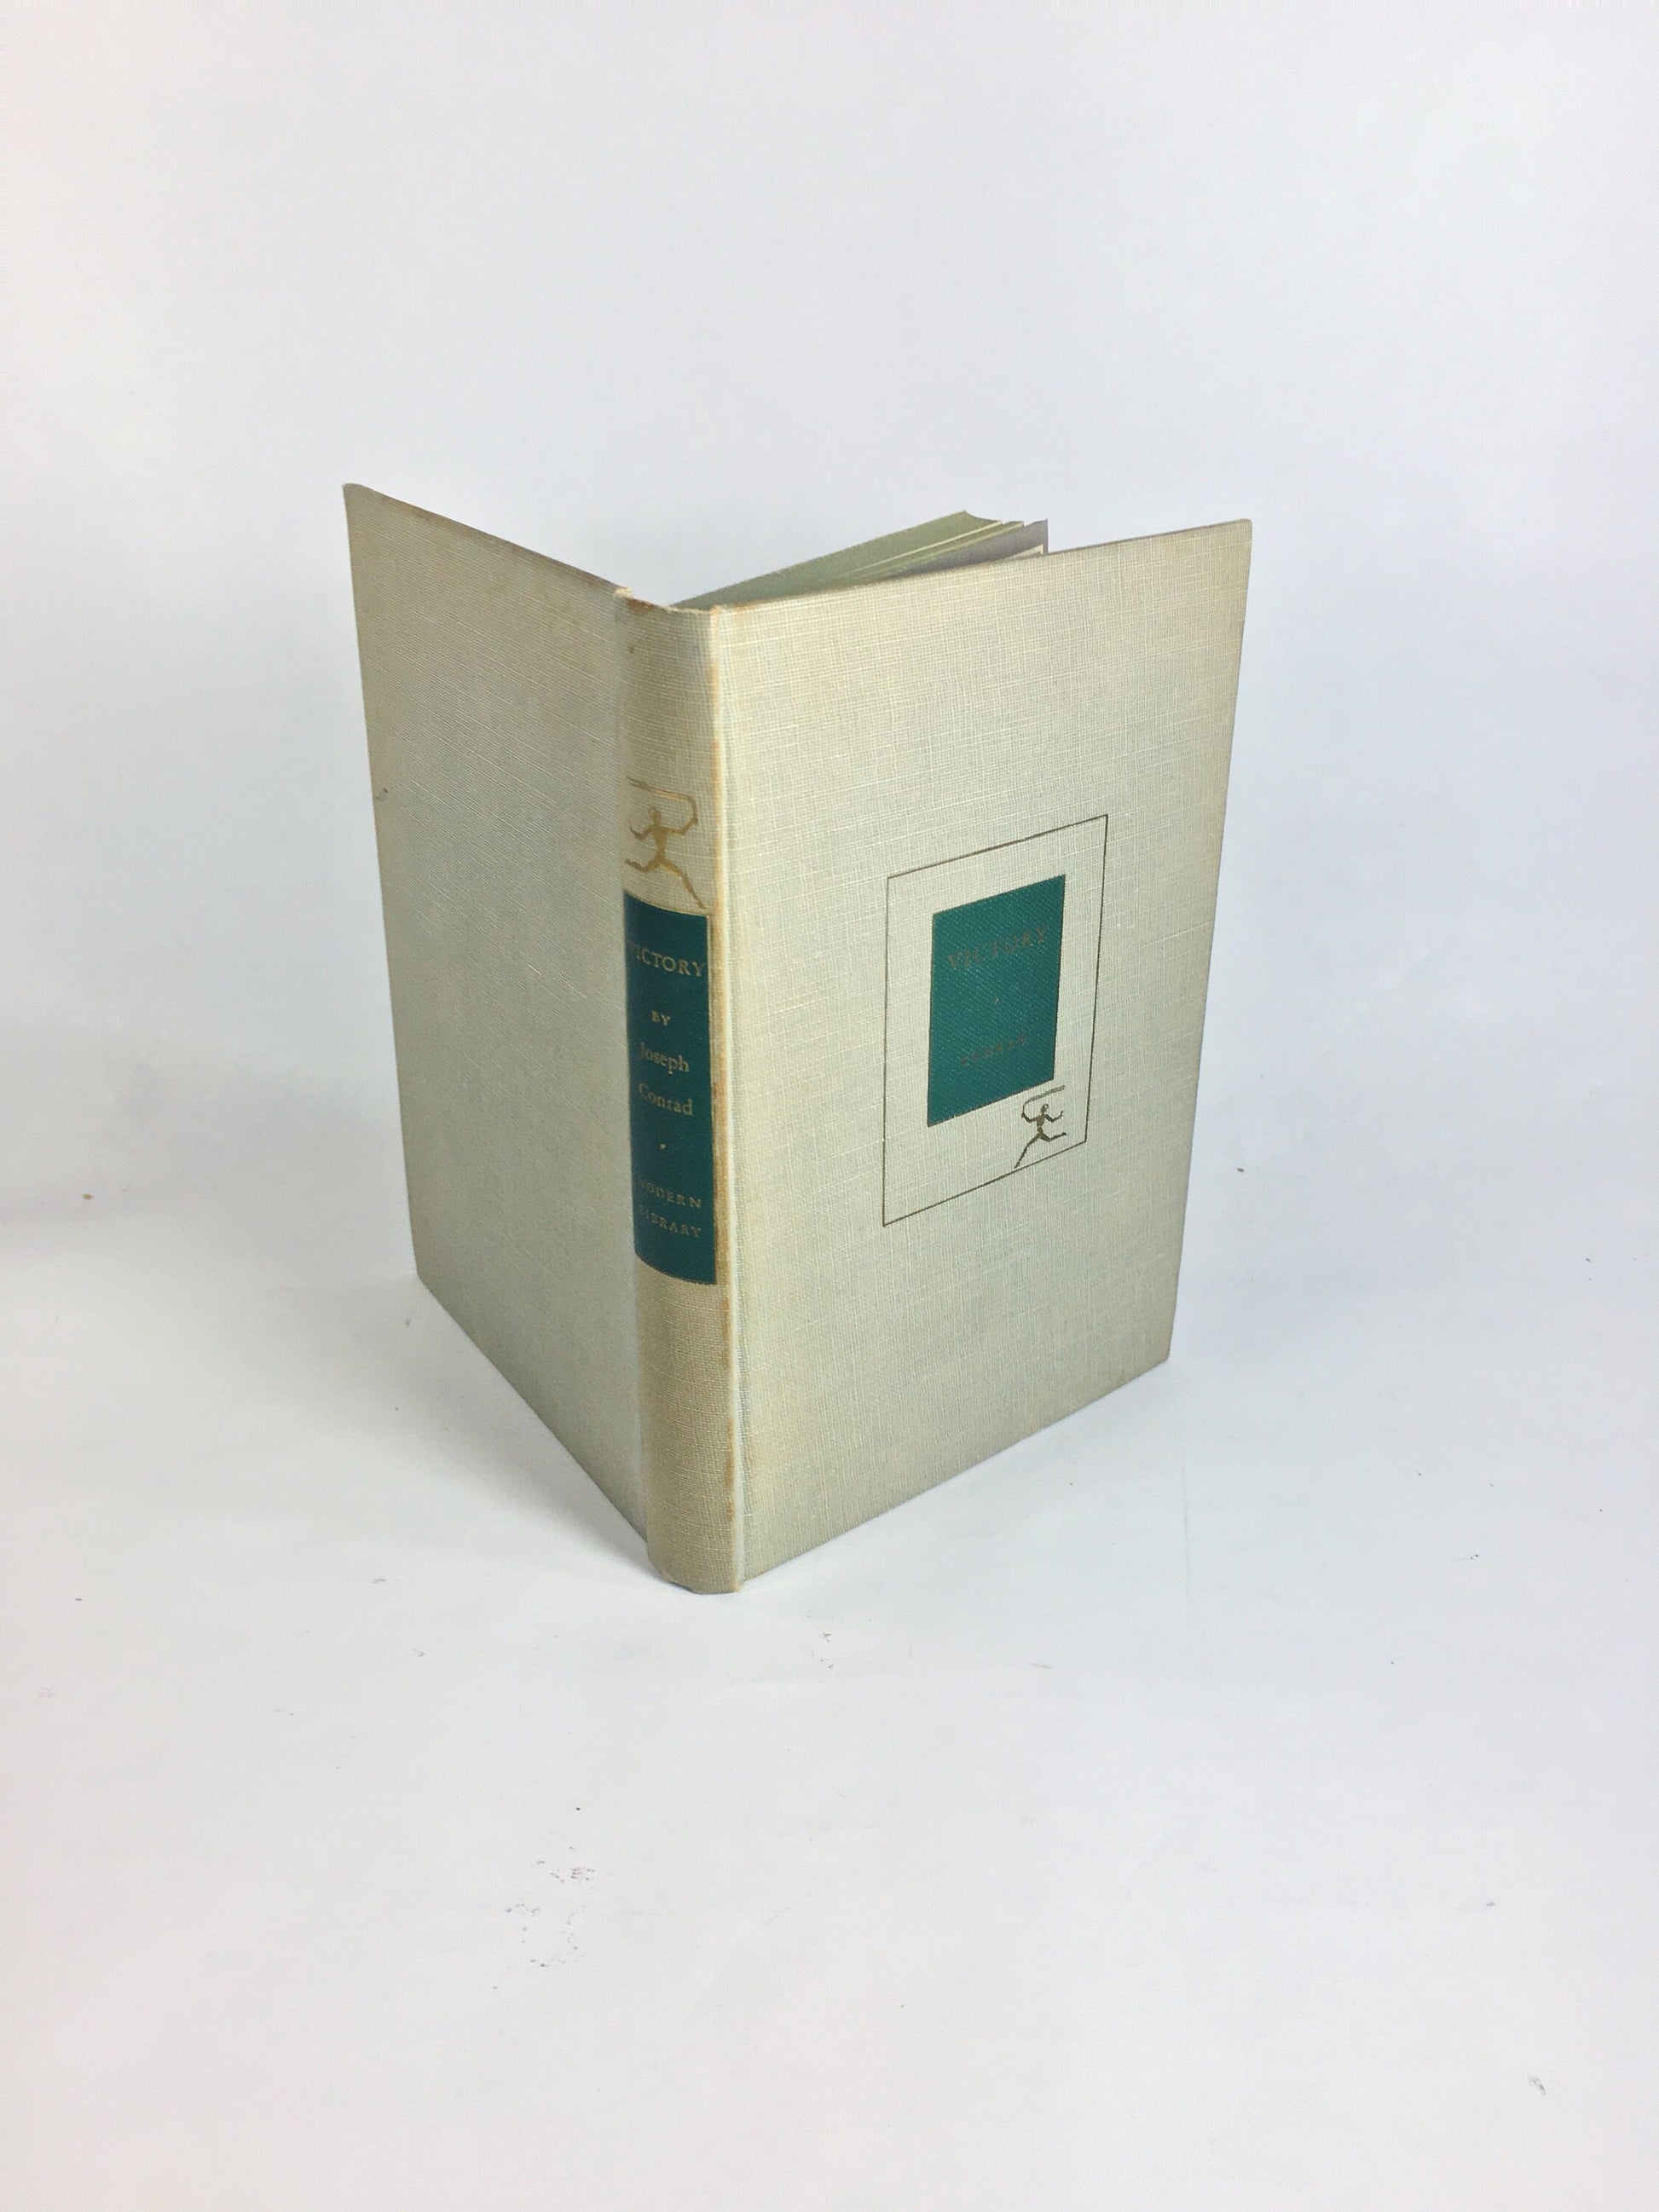 Victory by Joseph Conrad circa 1921. Psychological novel about a man who learned not to hope or love. Gray cloth covered Modern Library Book